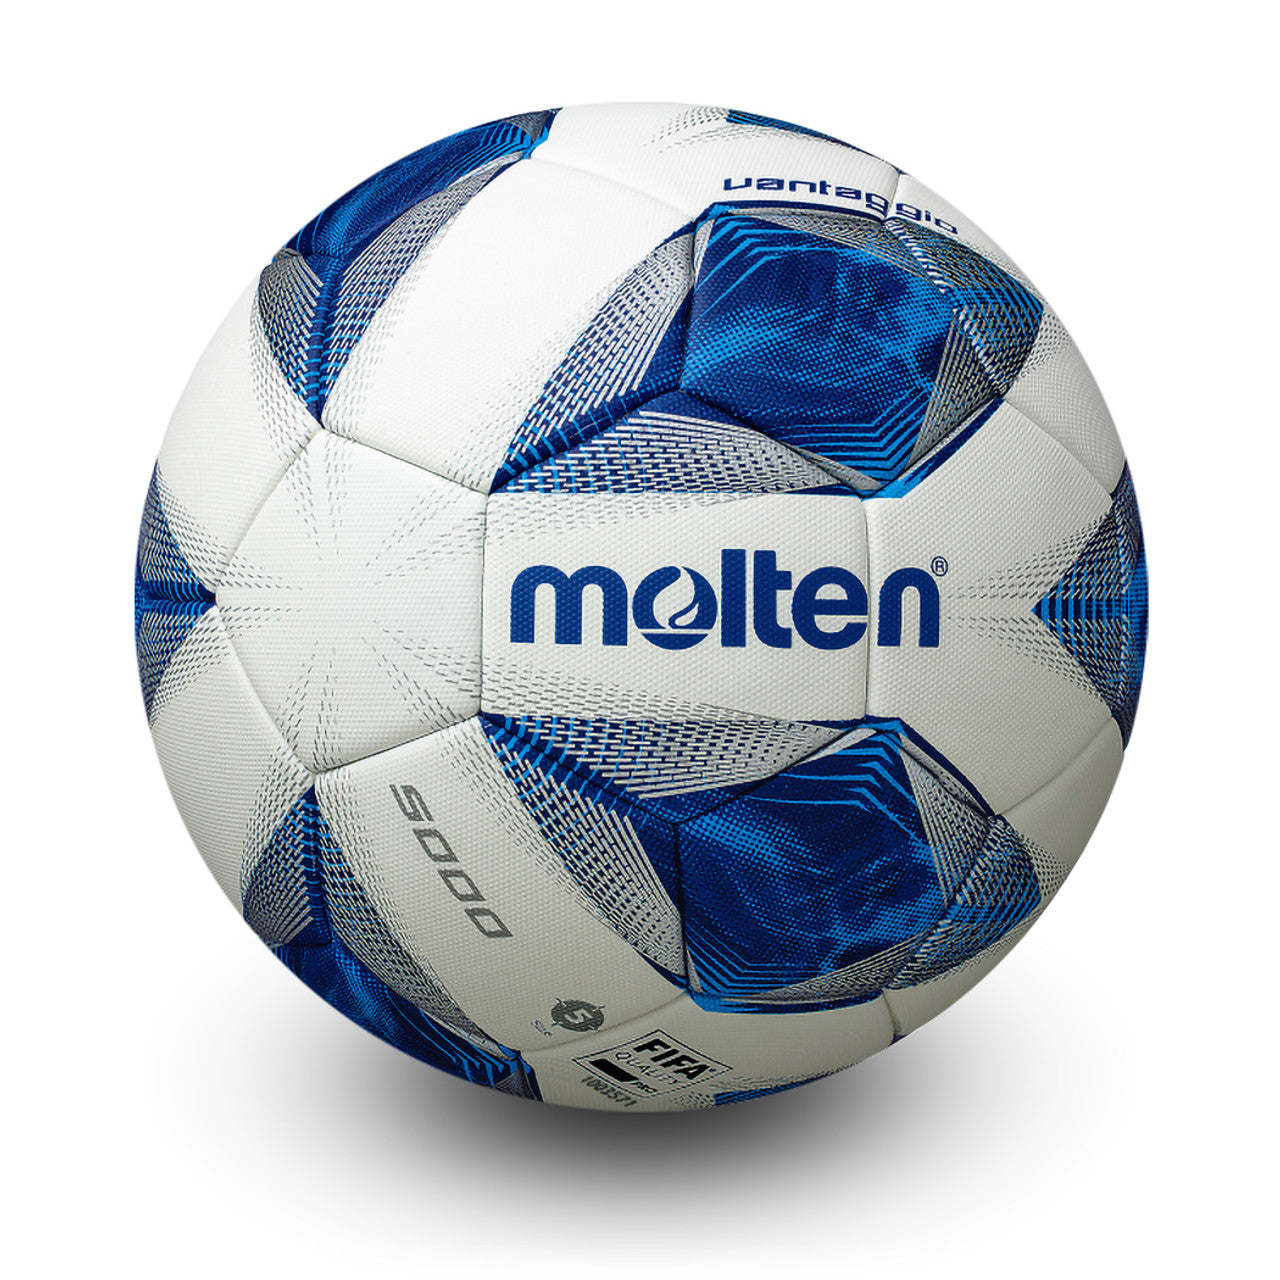 Molten Elite Competition Soccer Ball with Patented ACENTEC™ technology, 4-ply, textured cover, high density latex bladder, FIFA Approved